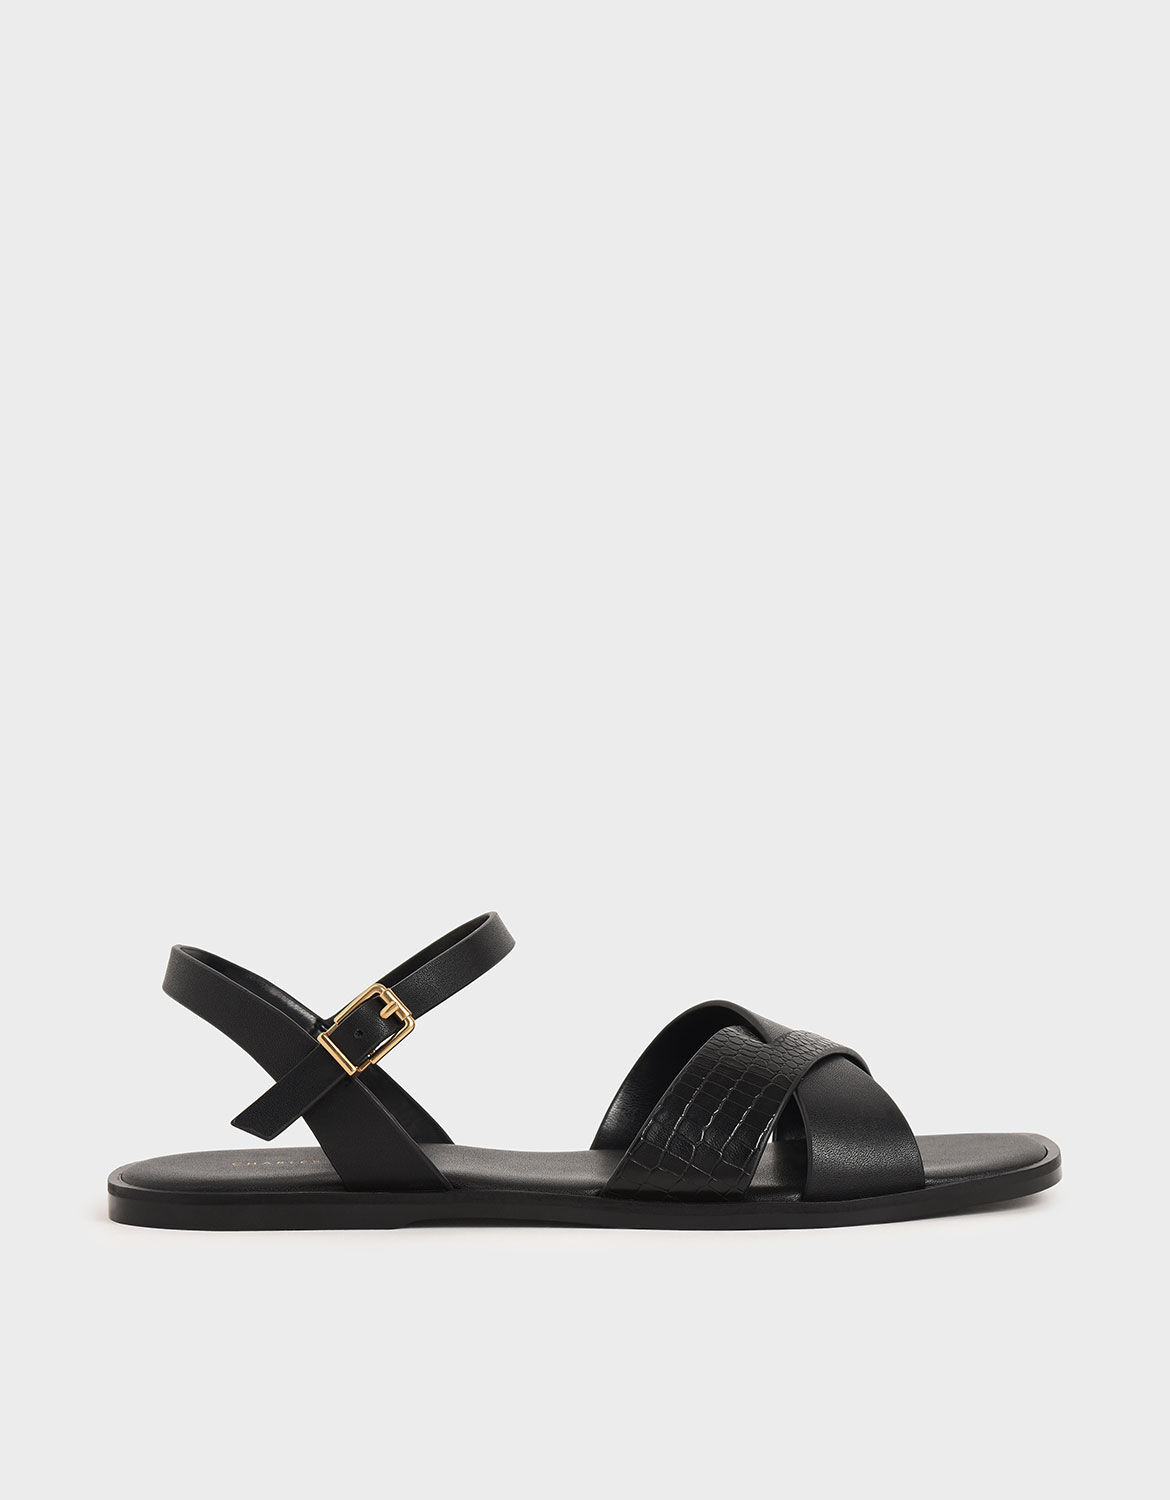 Shop Women's Flat Sandals | Exclusive Styles | CHARLES & KEITH SG